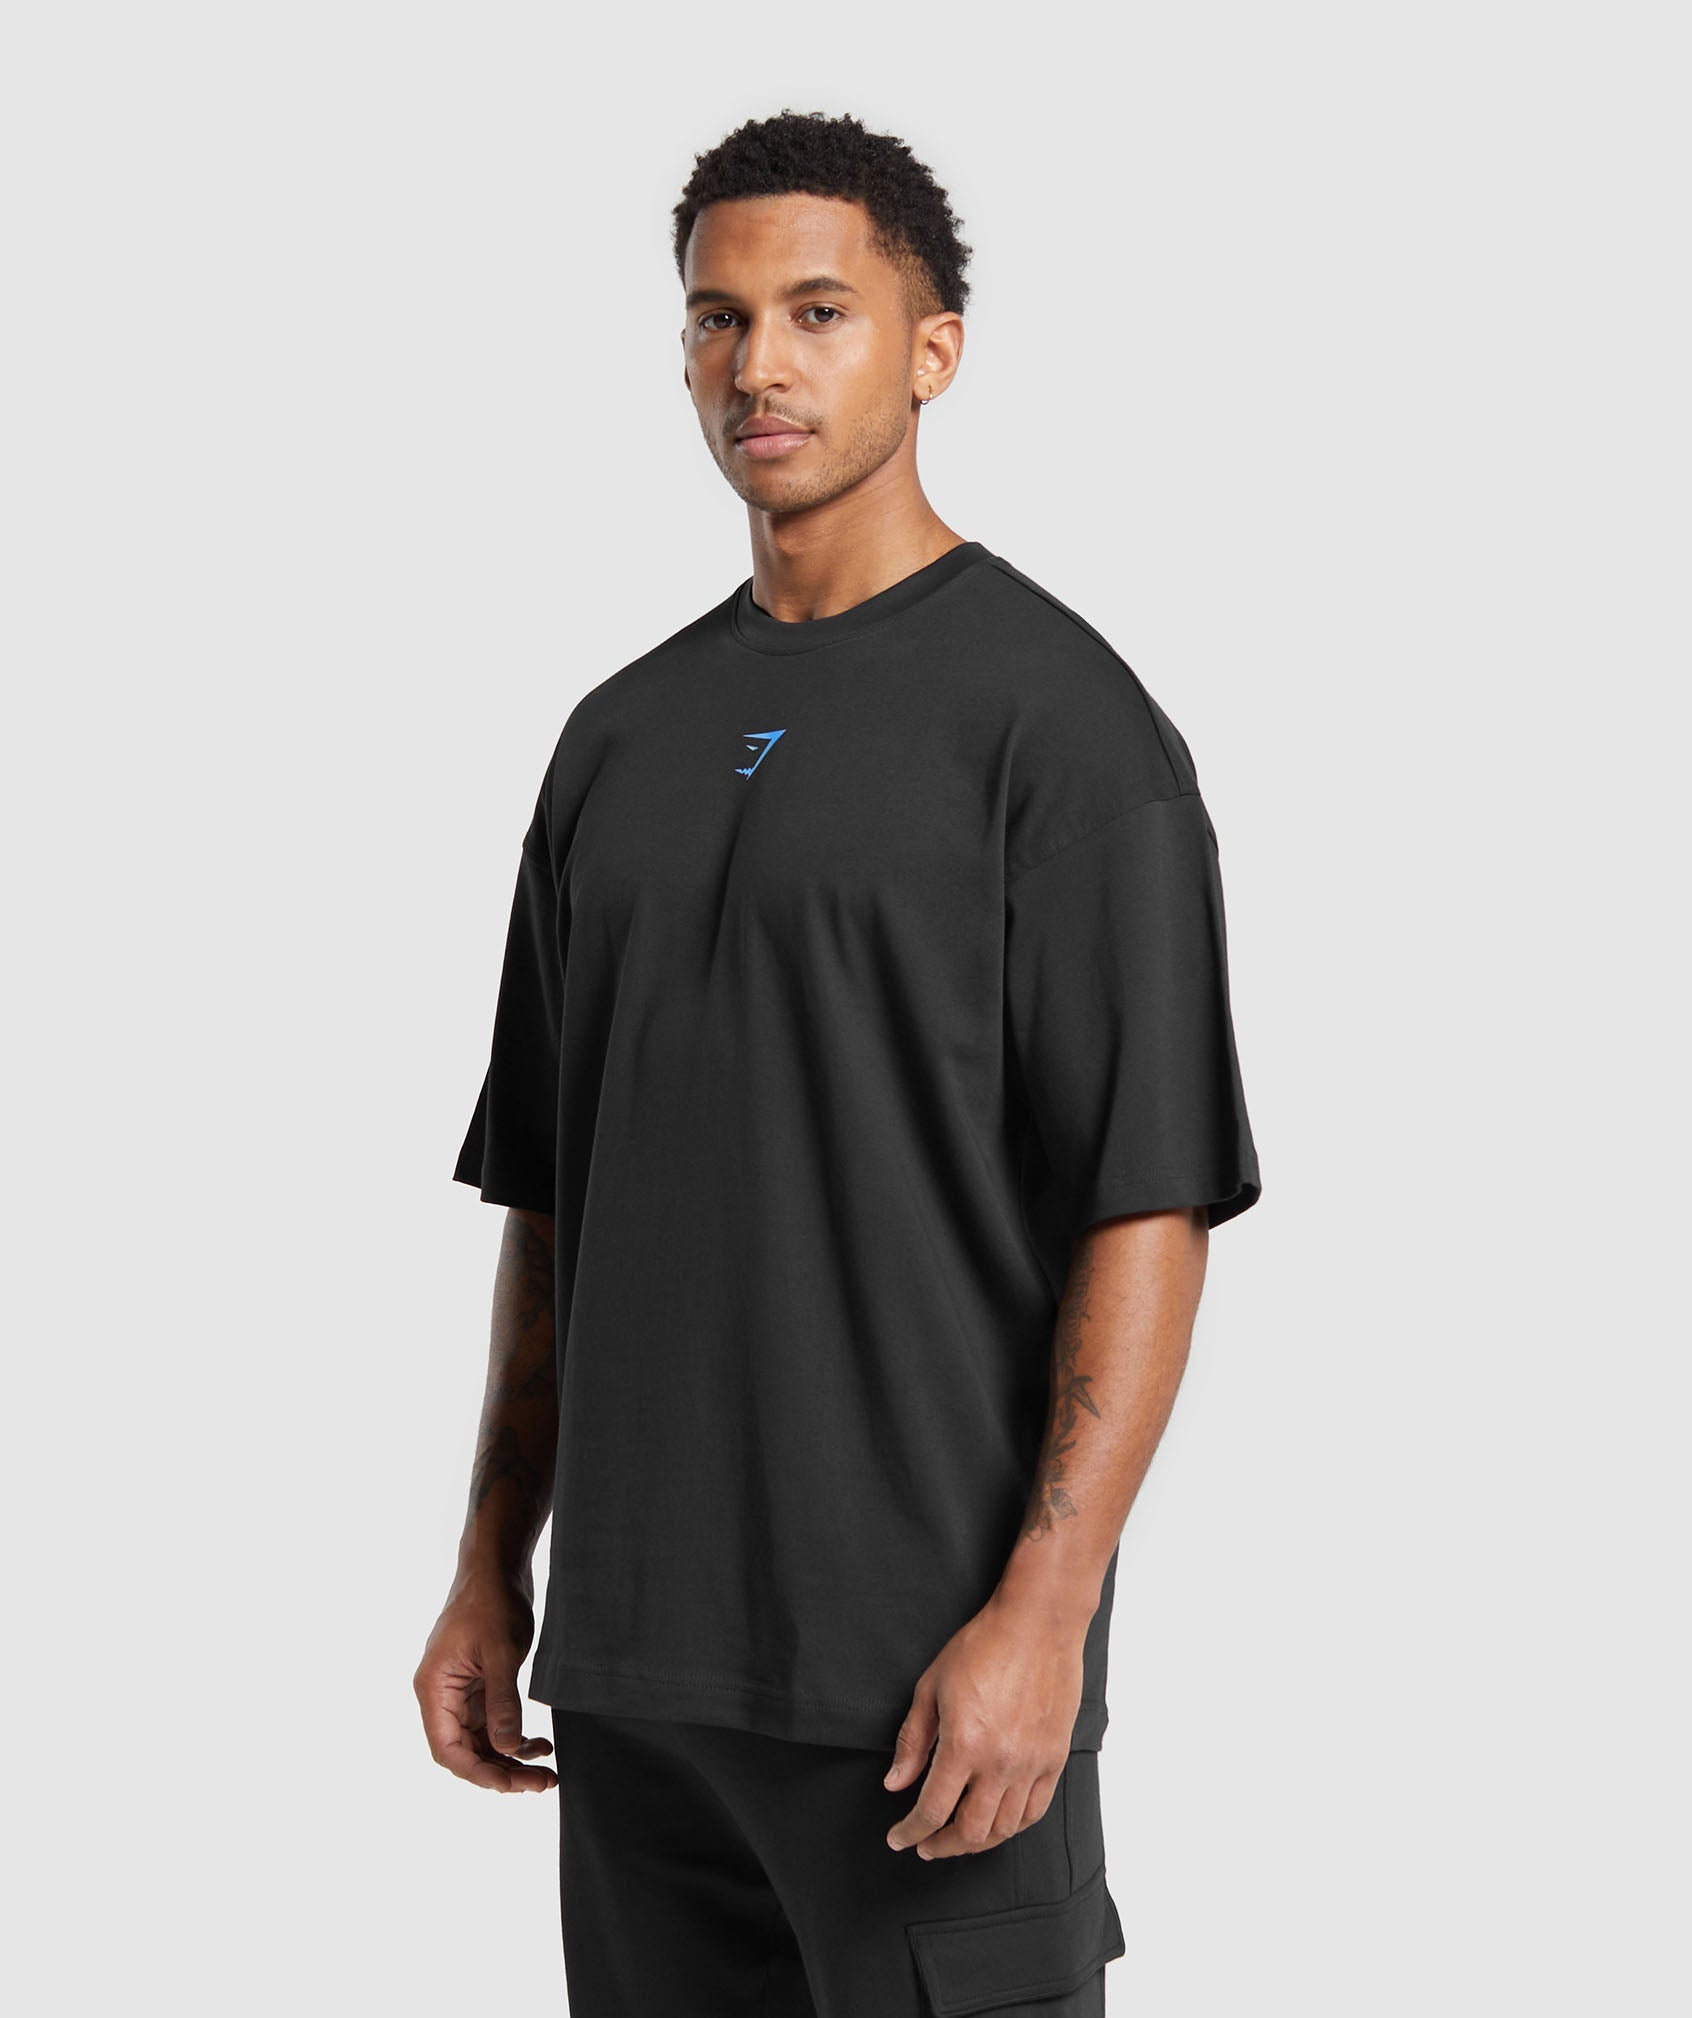 Miami Graphic T-Shirt in Black/Lats Blue - view 3